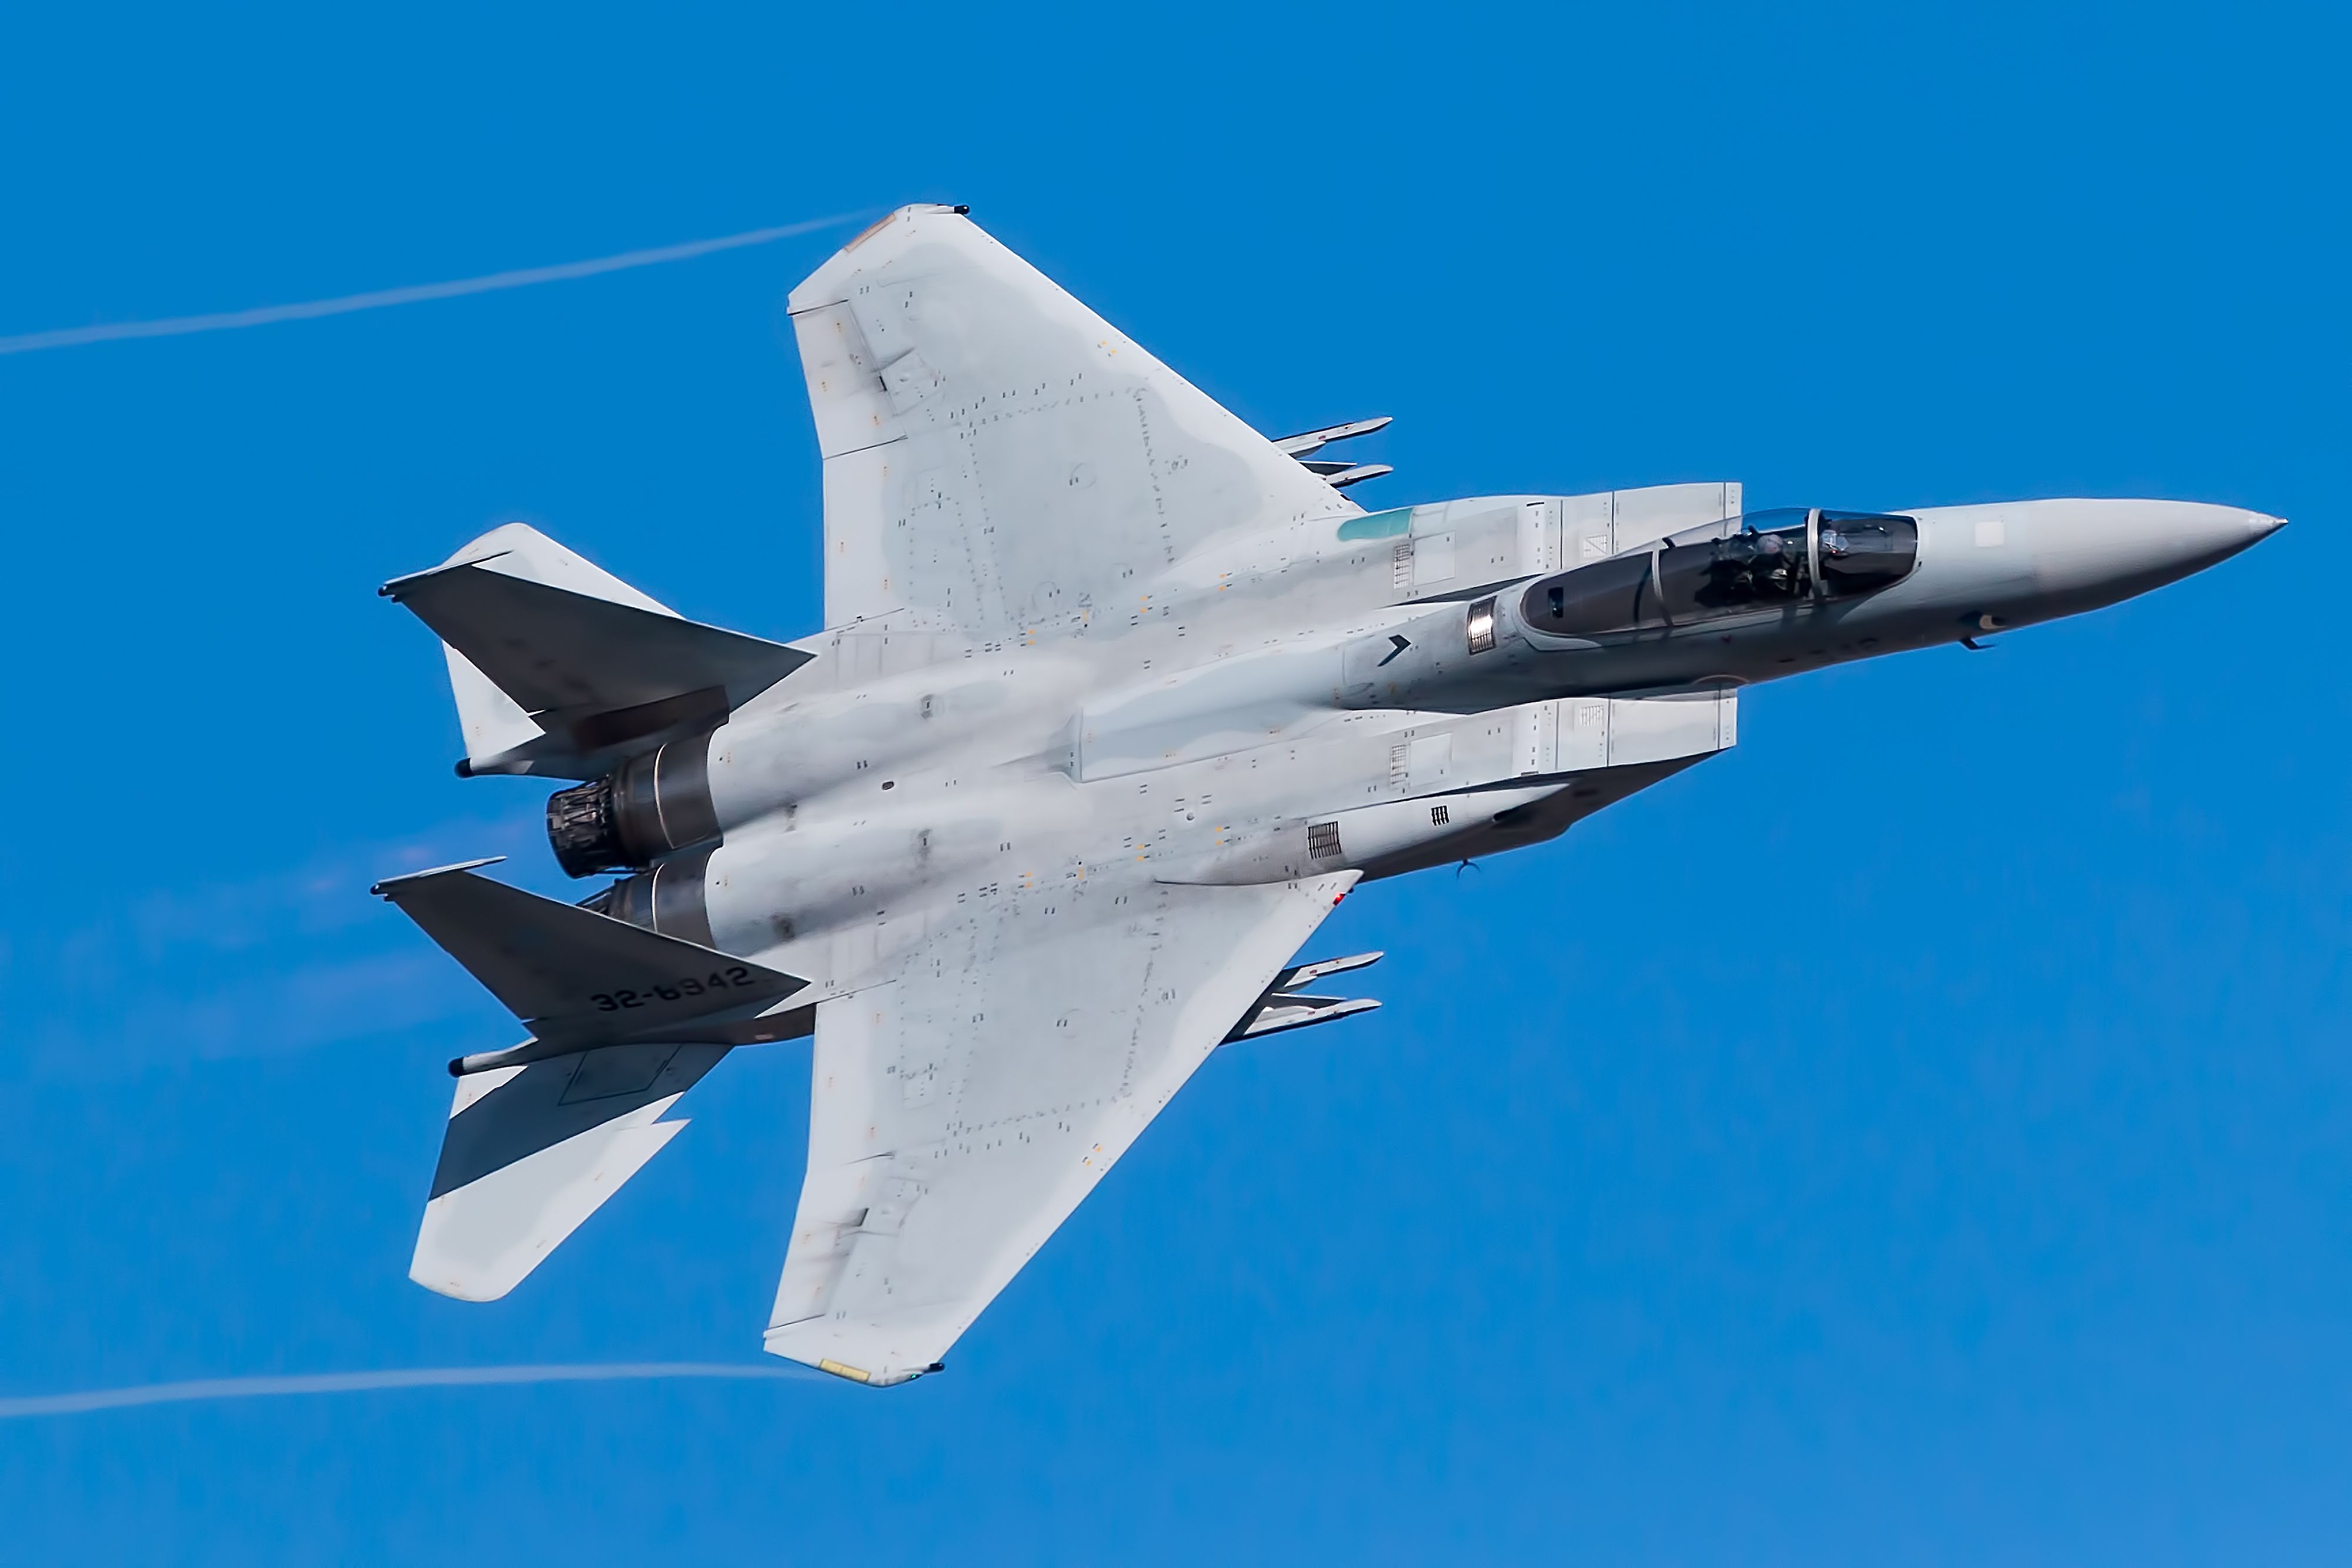 An F-15 Flying in the sky.